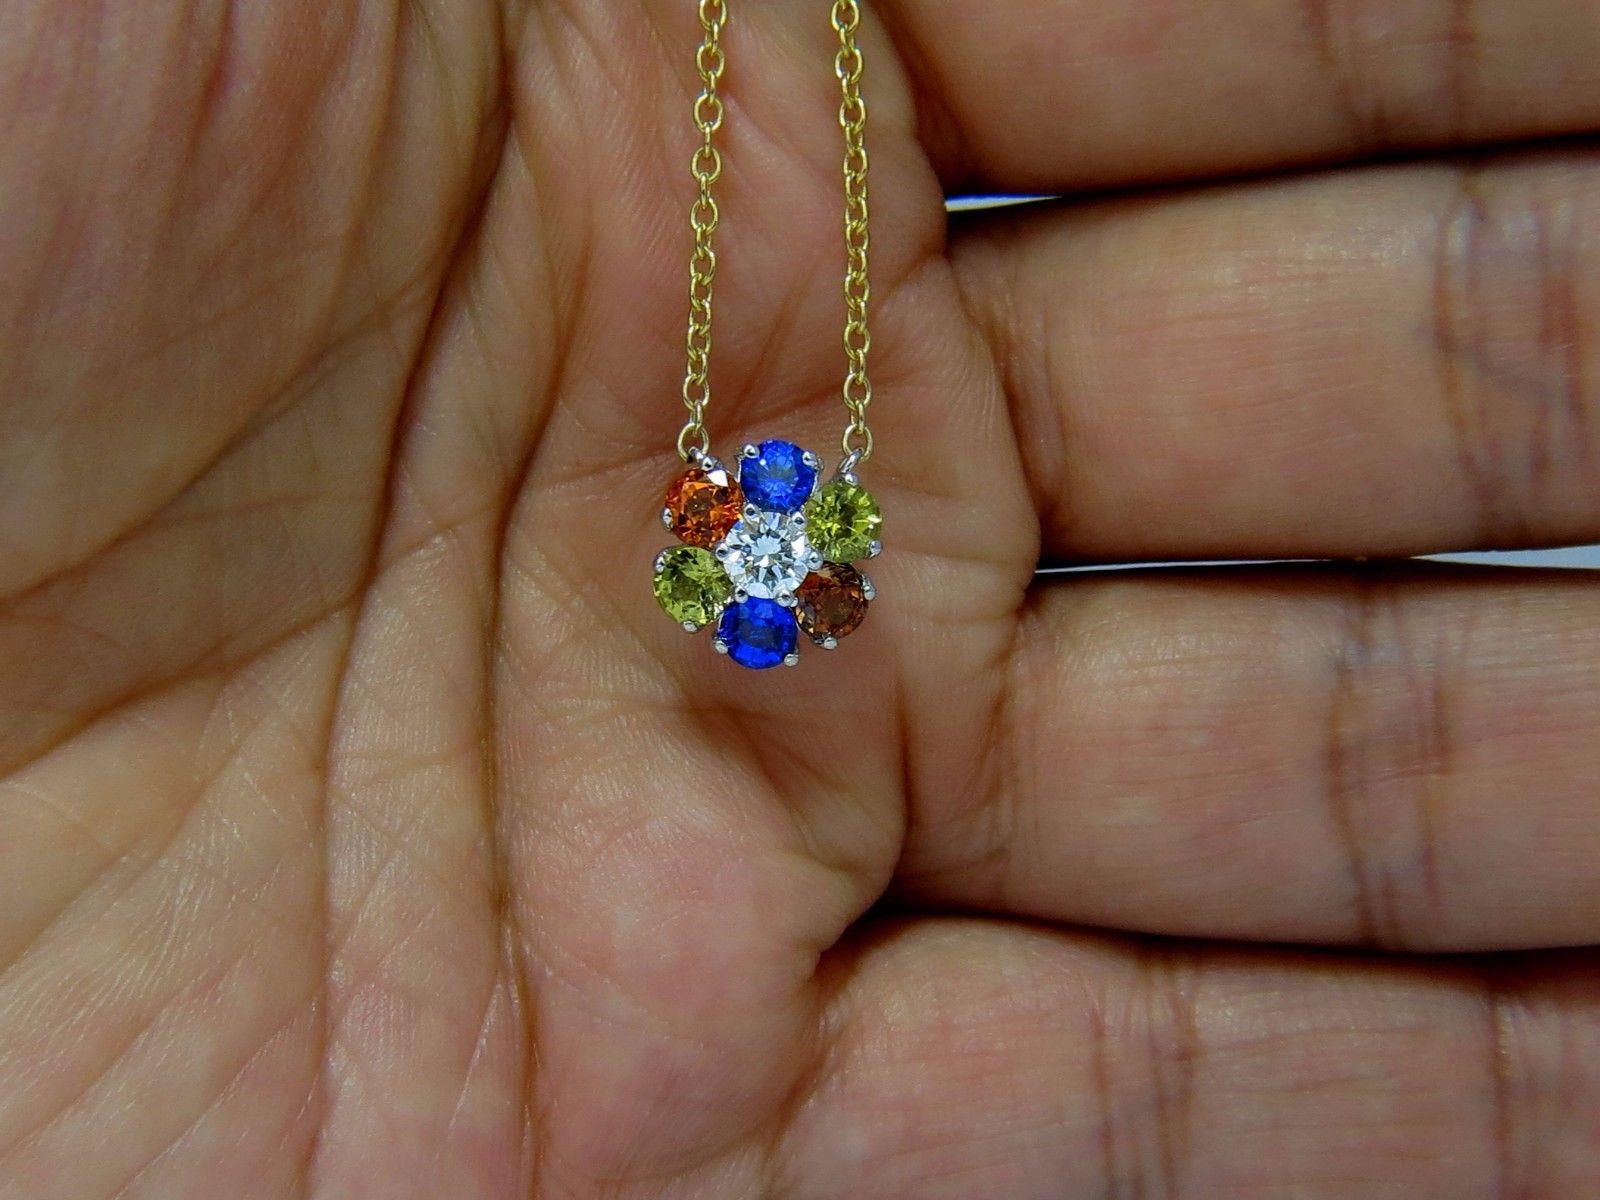 Multicolored Natural Gems stone cluster pendant & Necklace.

1.94ct natural multicolor sapphires

Bright Orange, Blue, Yellow & Pink.

.32ct round brilliant diamond

G-color Vs-2 clarity.

.44 inch diameter



14kt. yellow gold necklace & 14kt white